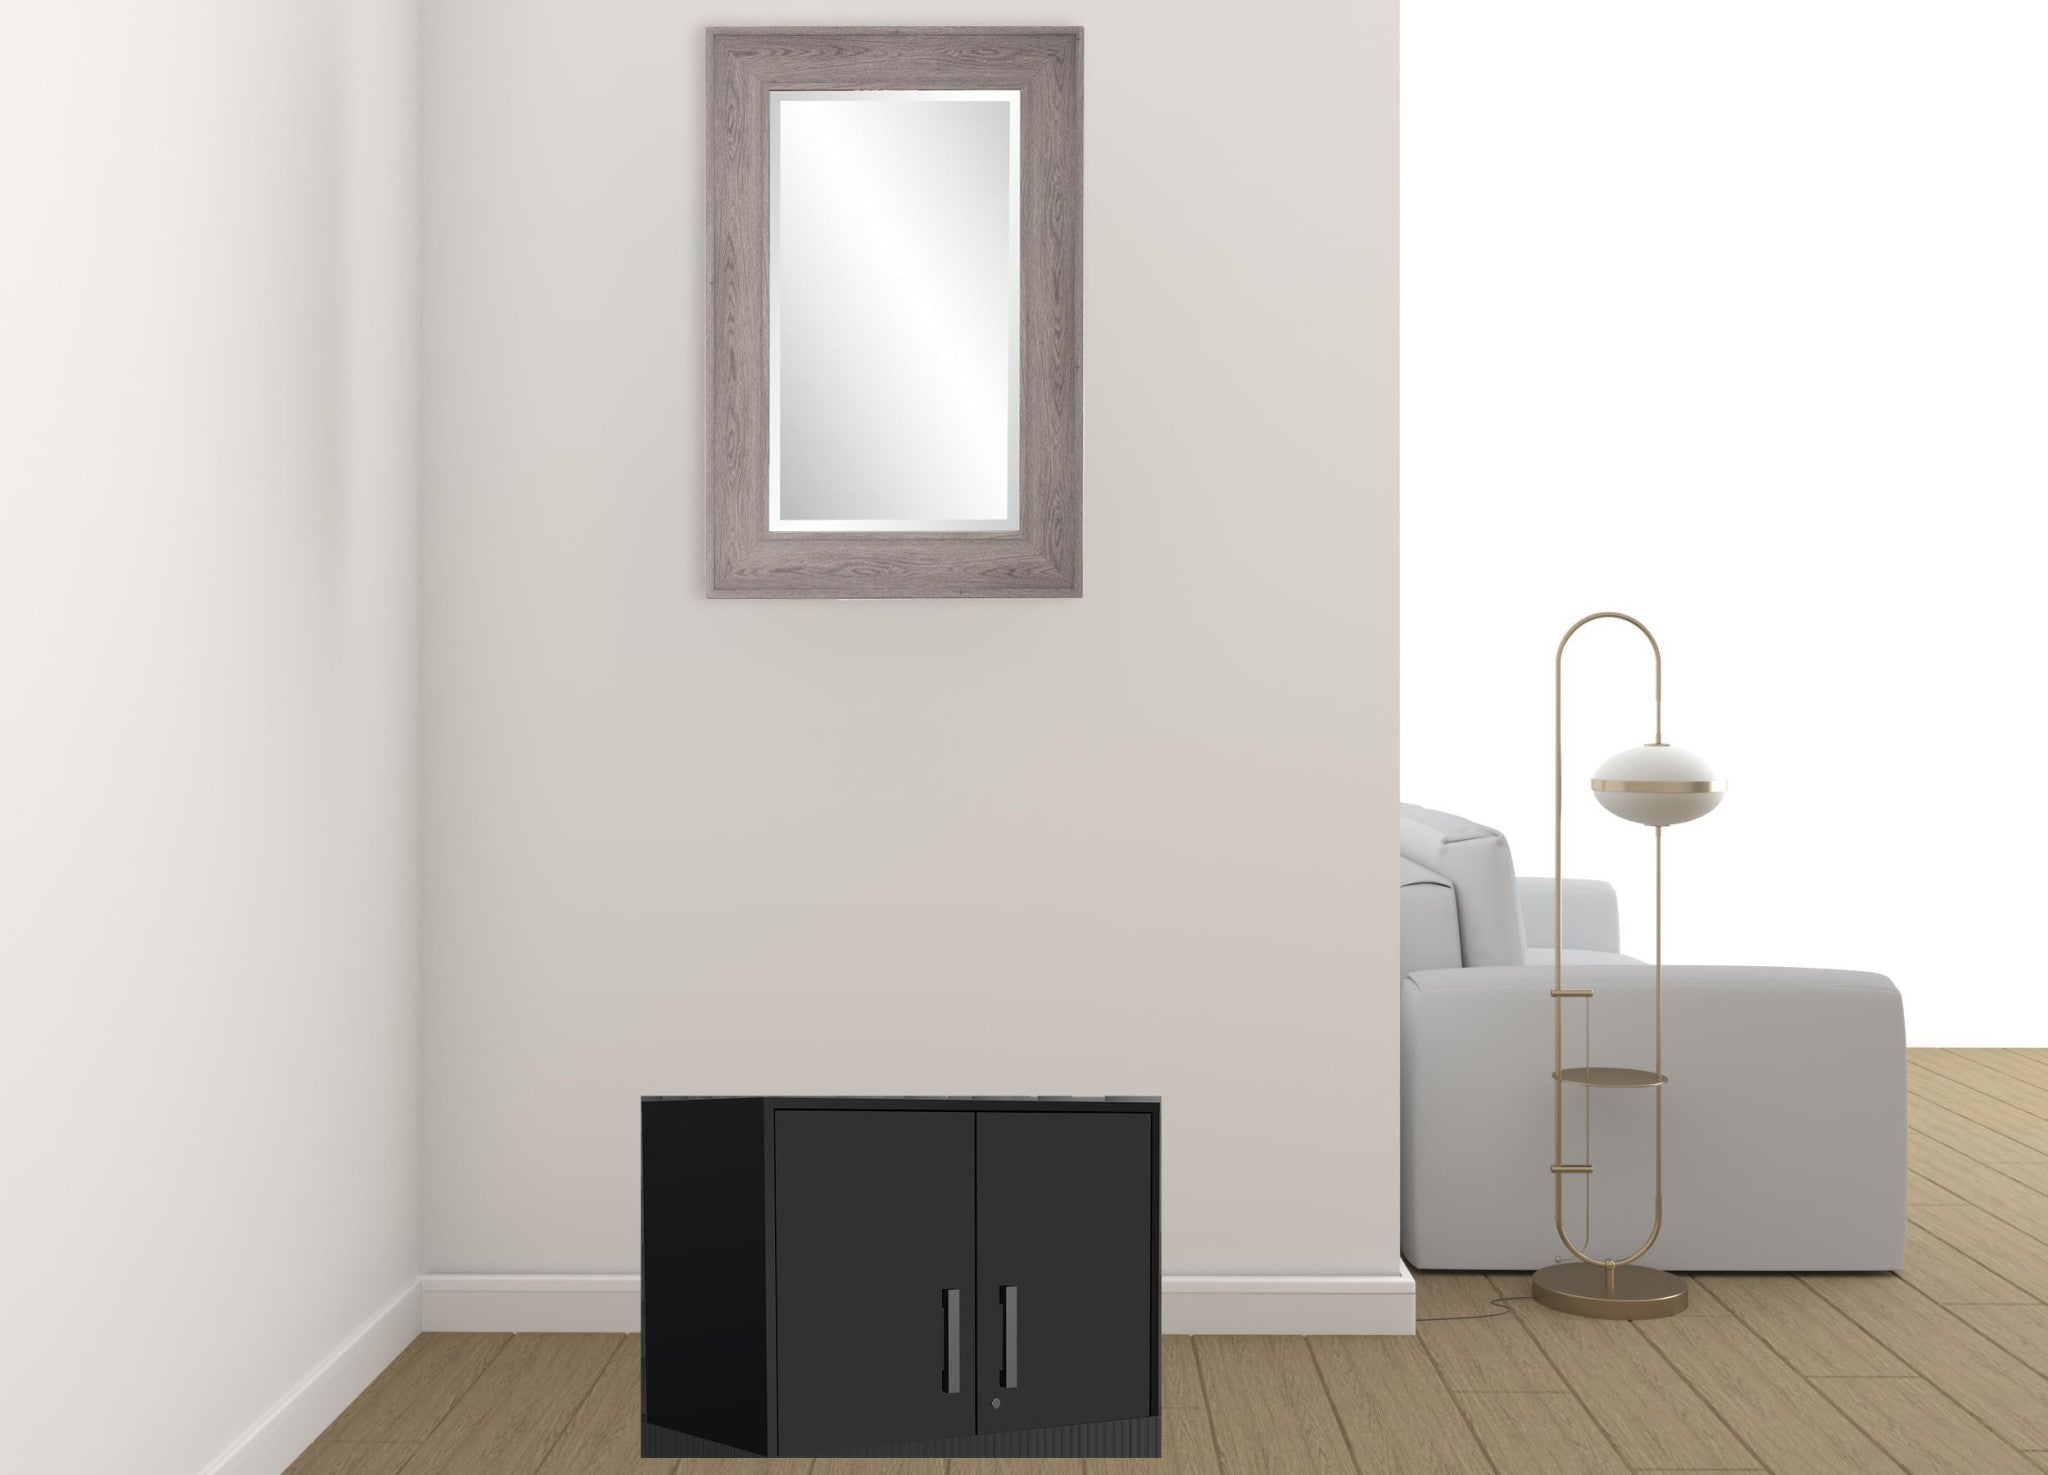 28" Black Wall mounted Accent Cabinet With Four Shelves